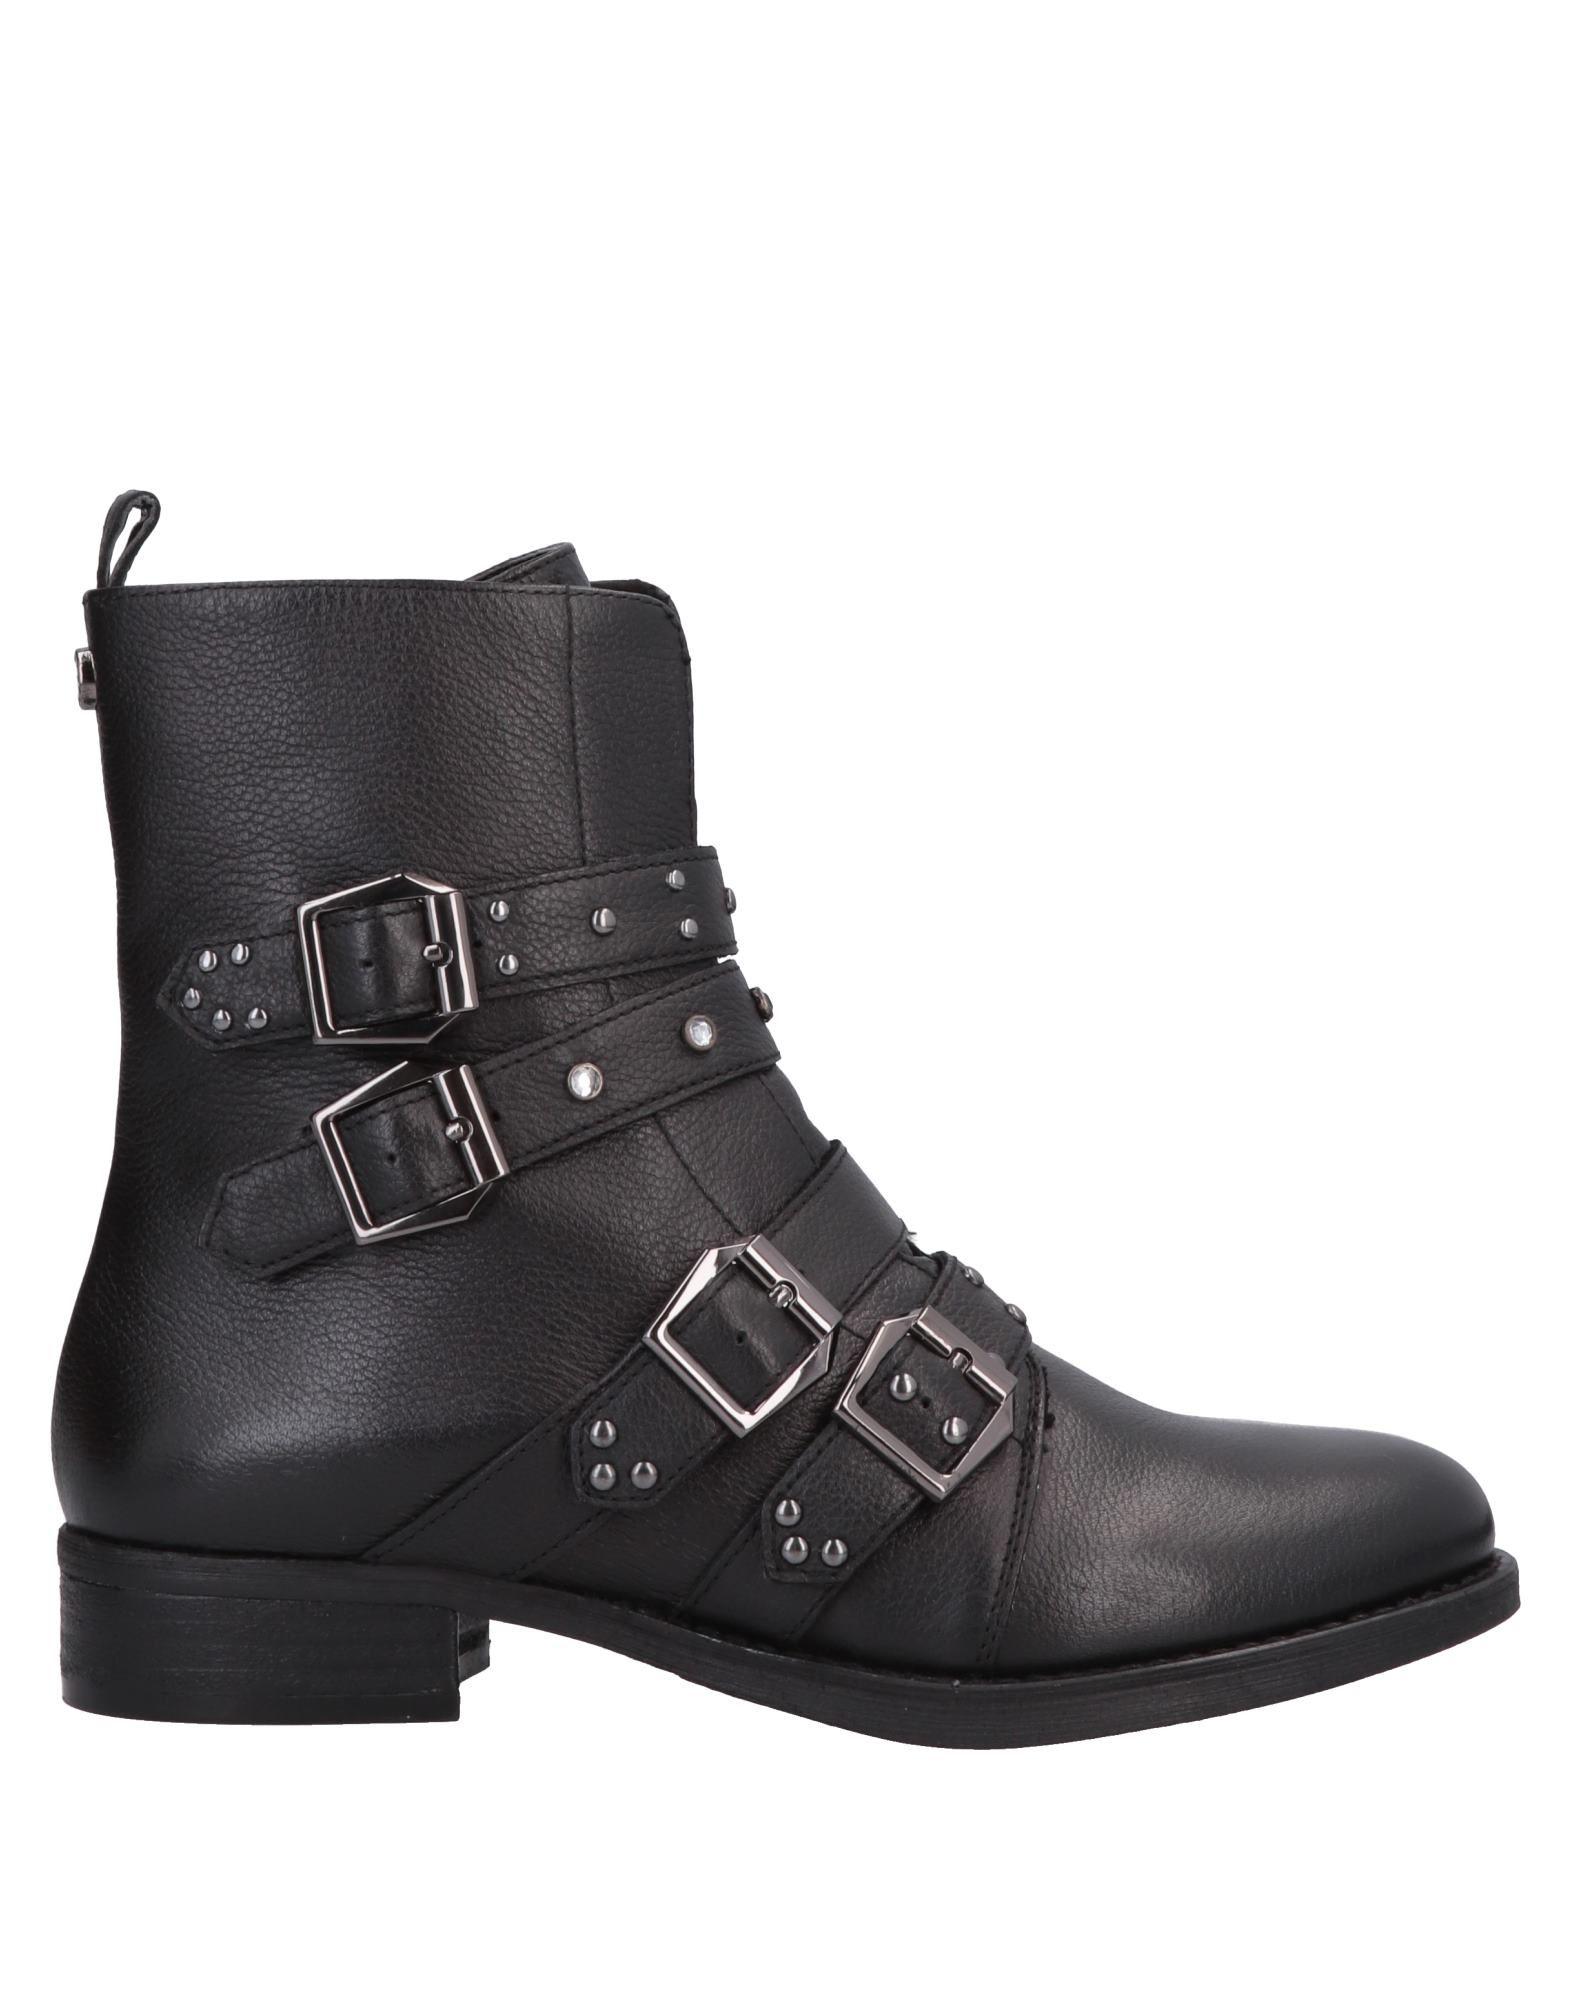 Steve Madden Leather Ankle Boots in Black - Lyst